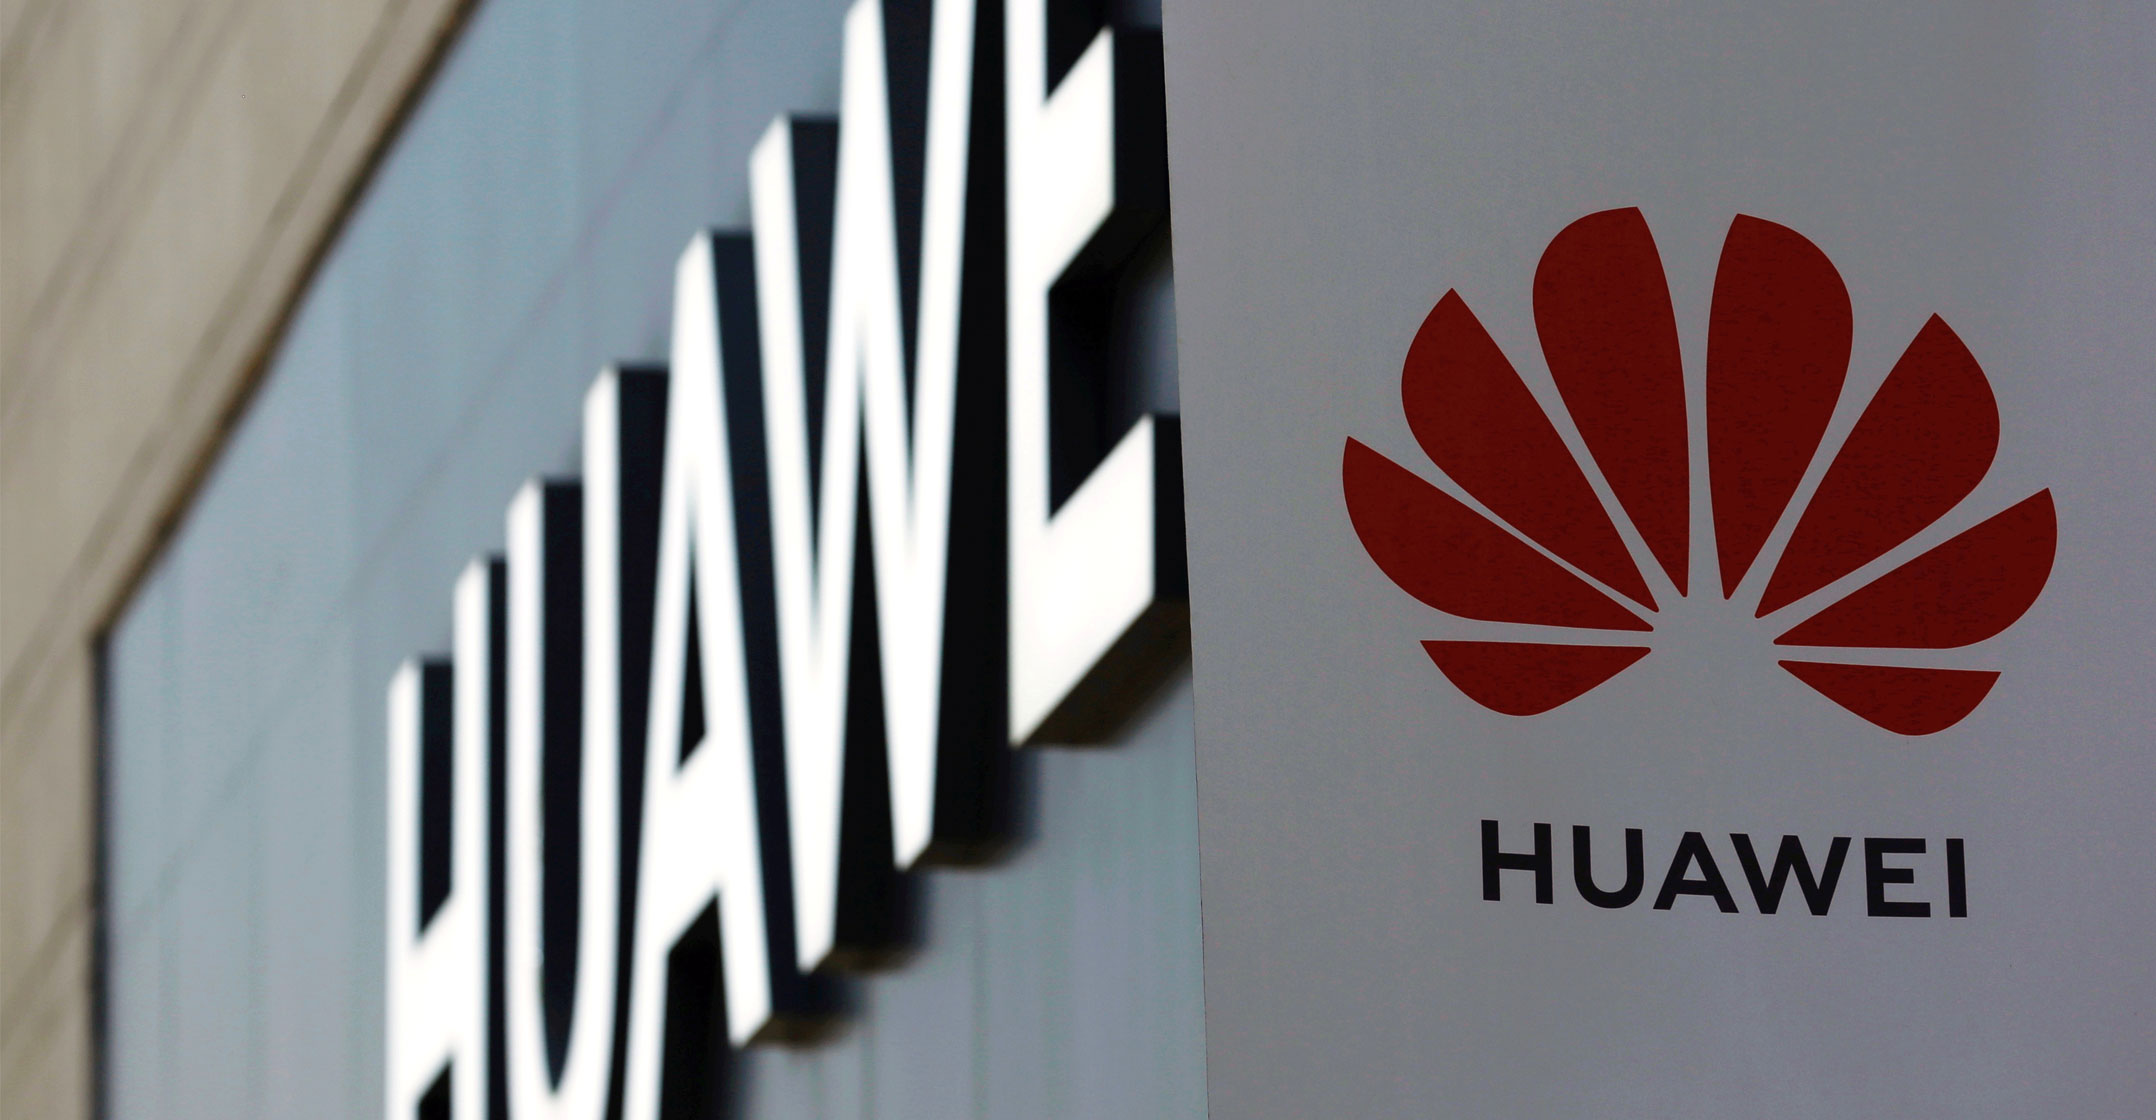 New US sanctions to slam Huawei, further roil tech supply - TechCentral